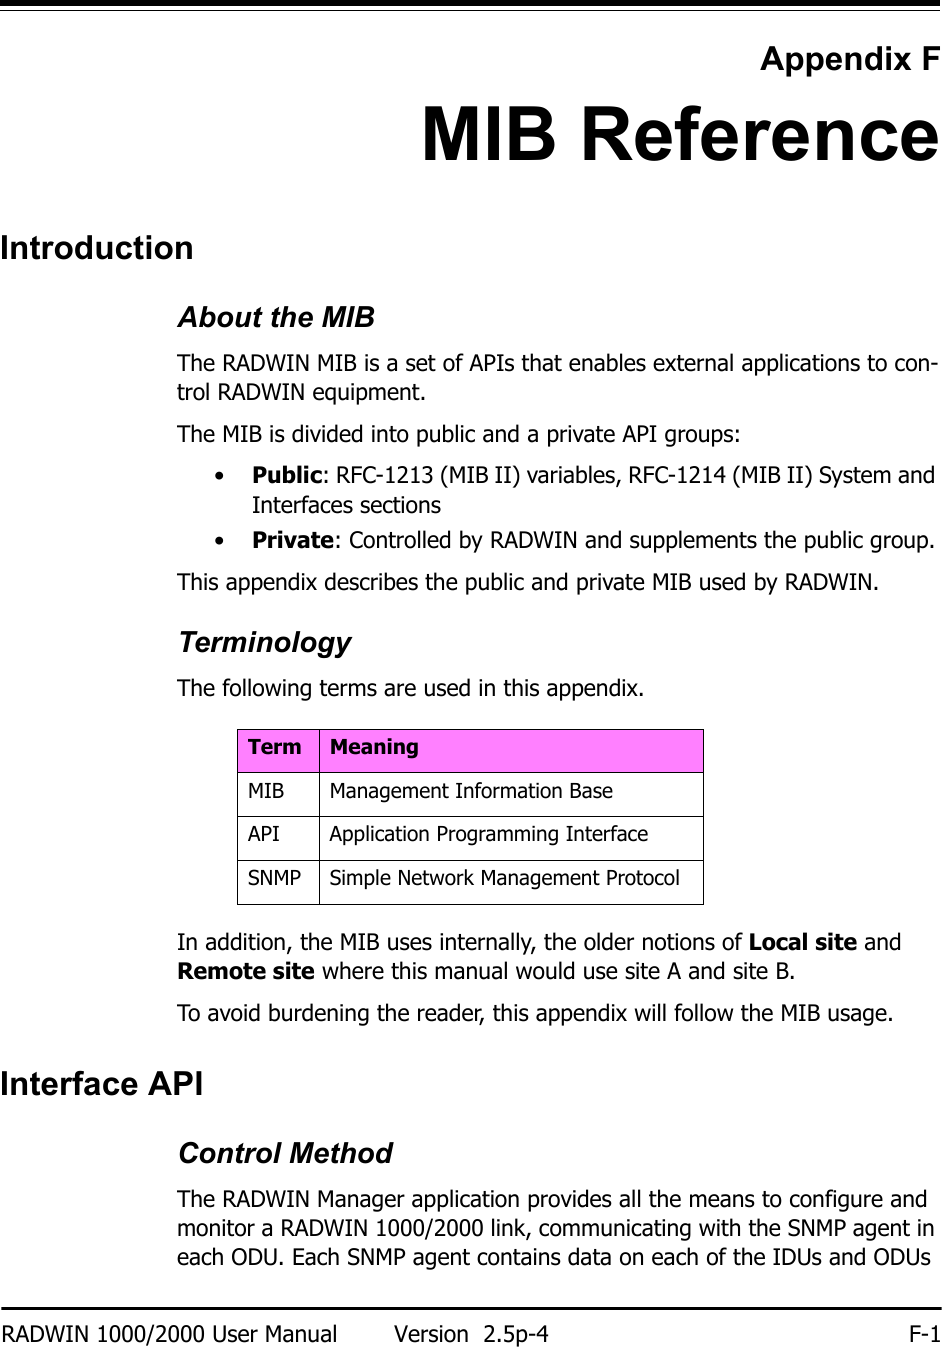 RADWIN 1000/2000 User Manual Version  2.5p-4 F-1Appendix FMIB ReferenceIntroductionAbout the MIBThe RADWIN MIB is a set of APIs that enables external applications to con-trol RADWIN equipment.The MIB is divided into public and a private API groups:•Public: RFC-1213 (MIB II) variables, RFC-1214 (MIB II) System and Interfaces sections•Private: Controlled by RADWIN and supplements the public group.This appendix describes the public and private MIB used by RADWIN.TerminologyThe following terms are used in this appendix.In addition, the MIB uses internally, the older notions of Local site and Remote site where this manual would use site A and site B.To avoid burdening the reader, this appendix will follow the MIB usage.Interface APIControl MethodThe RADWIN Manager application provides all the means to configure and monitor a RADWIN 1000/2000 link, communicating with the SNMP agent in each ODU. Each SNMP agent contains data on each of the IDUs and ODUs Term MeaningMIB Management Information BaseAPI Application Programming InterfaceSNMP Simple Network Management Protocol